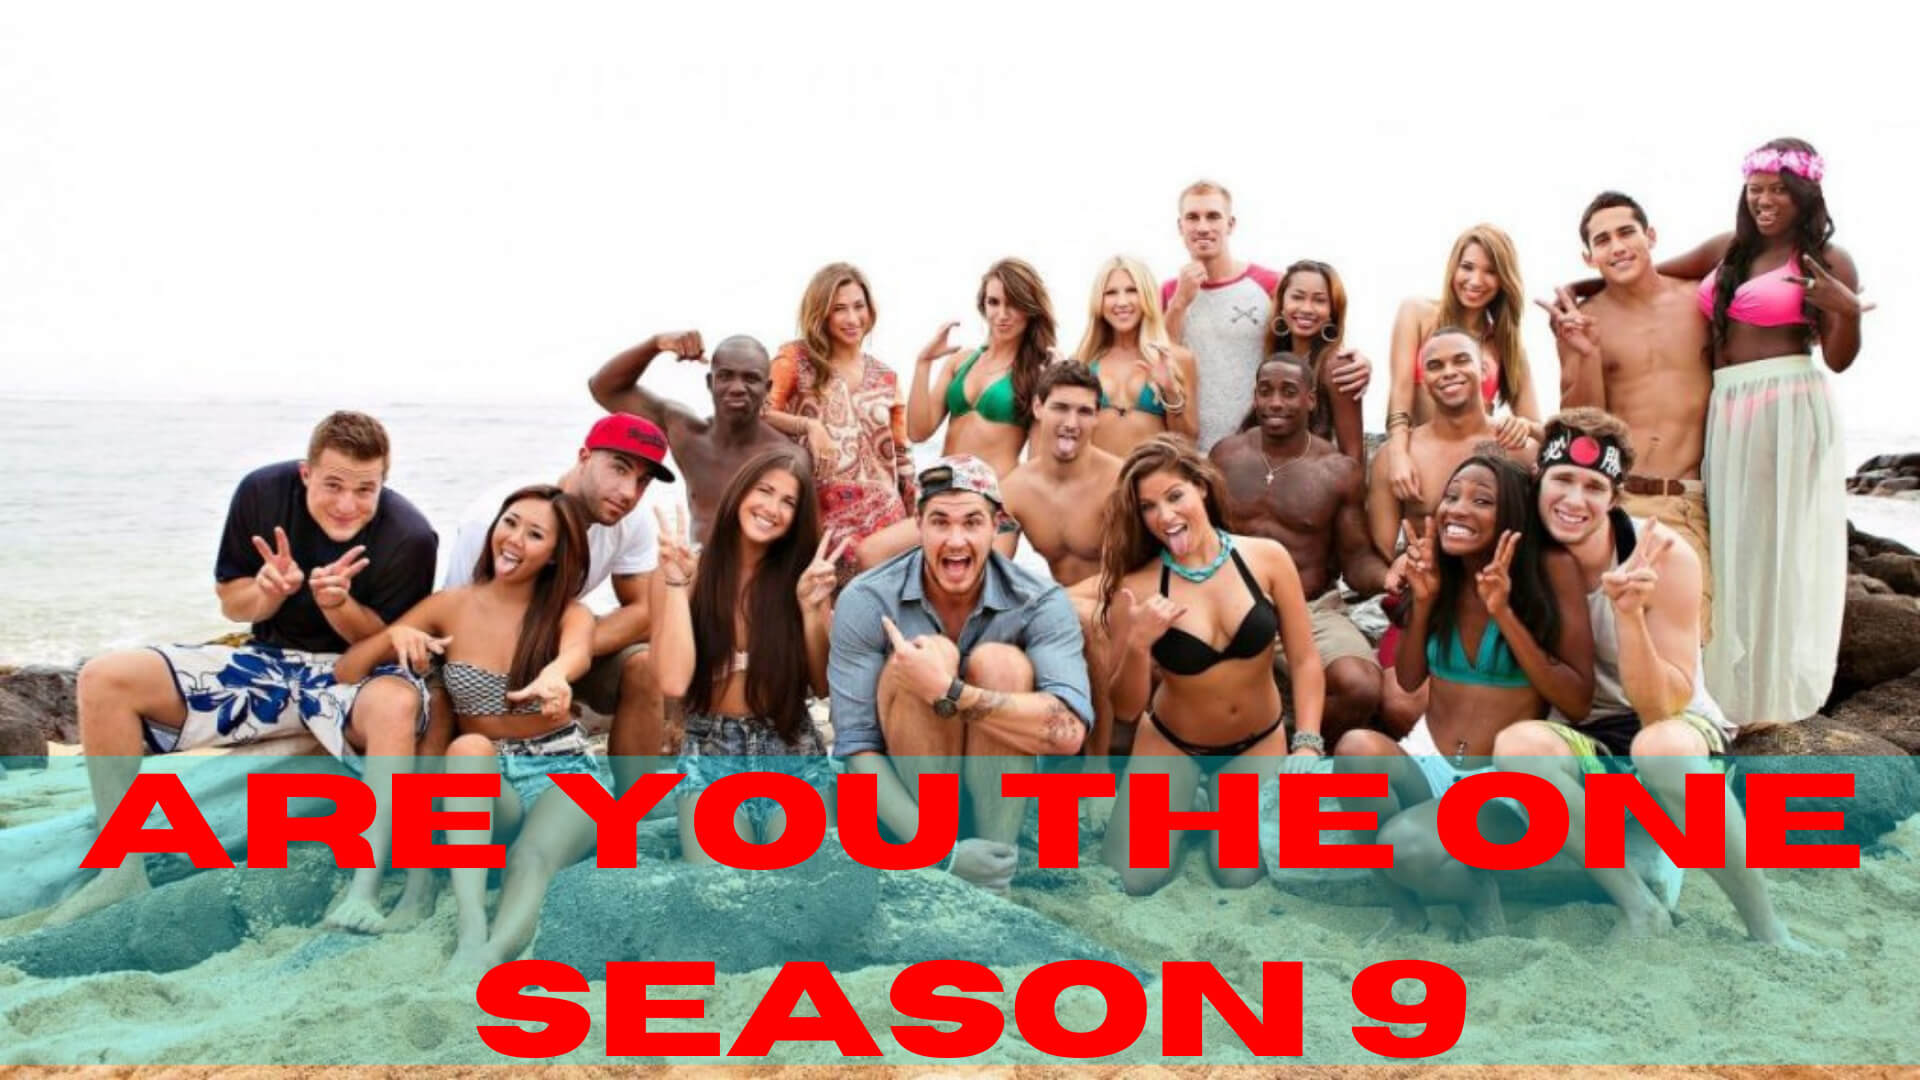 When Is Are You The One Season 9 Coming Out? (Release Date)